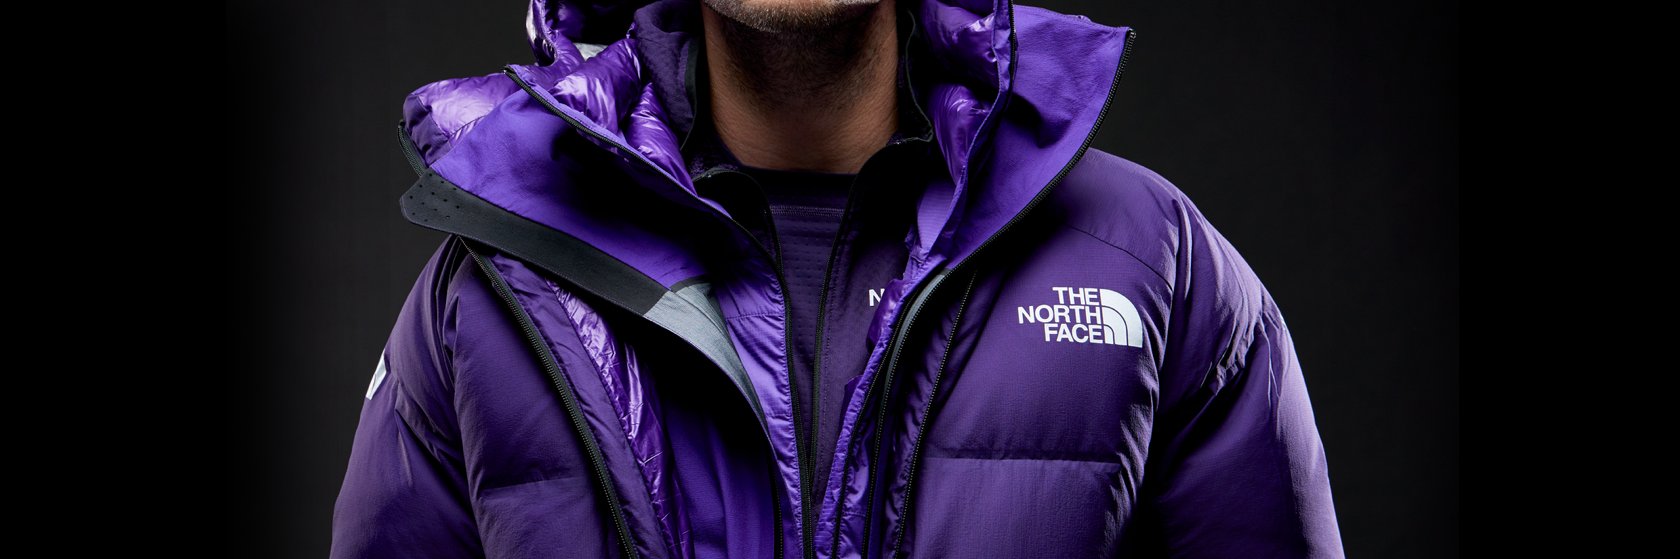 The North Face Brings Five Technologies to Market with the